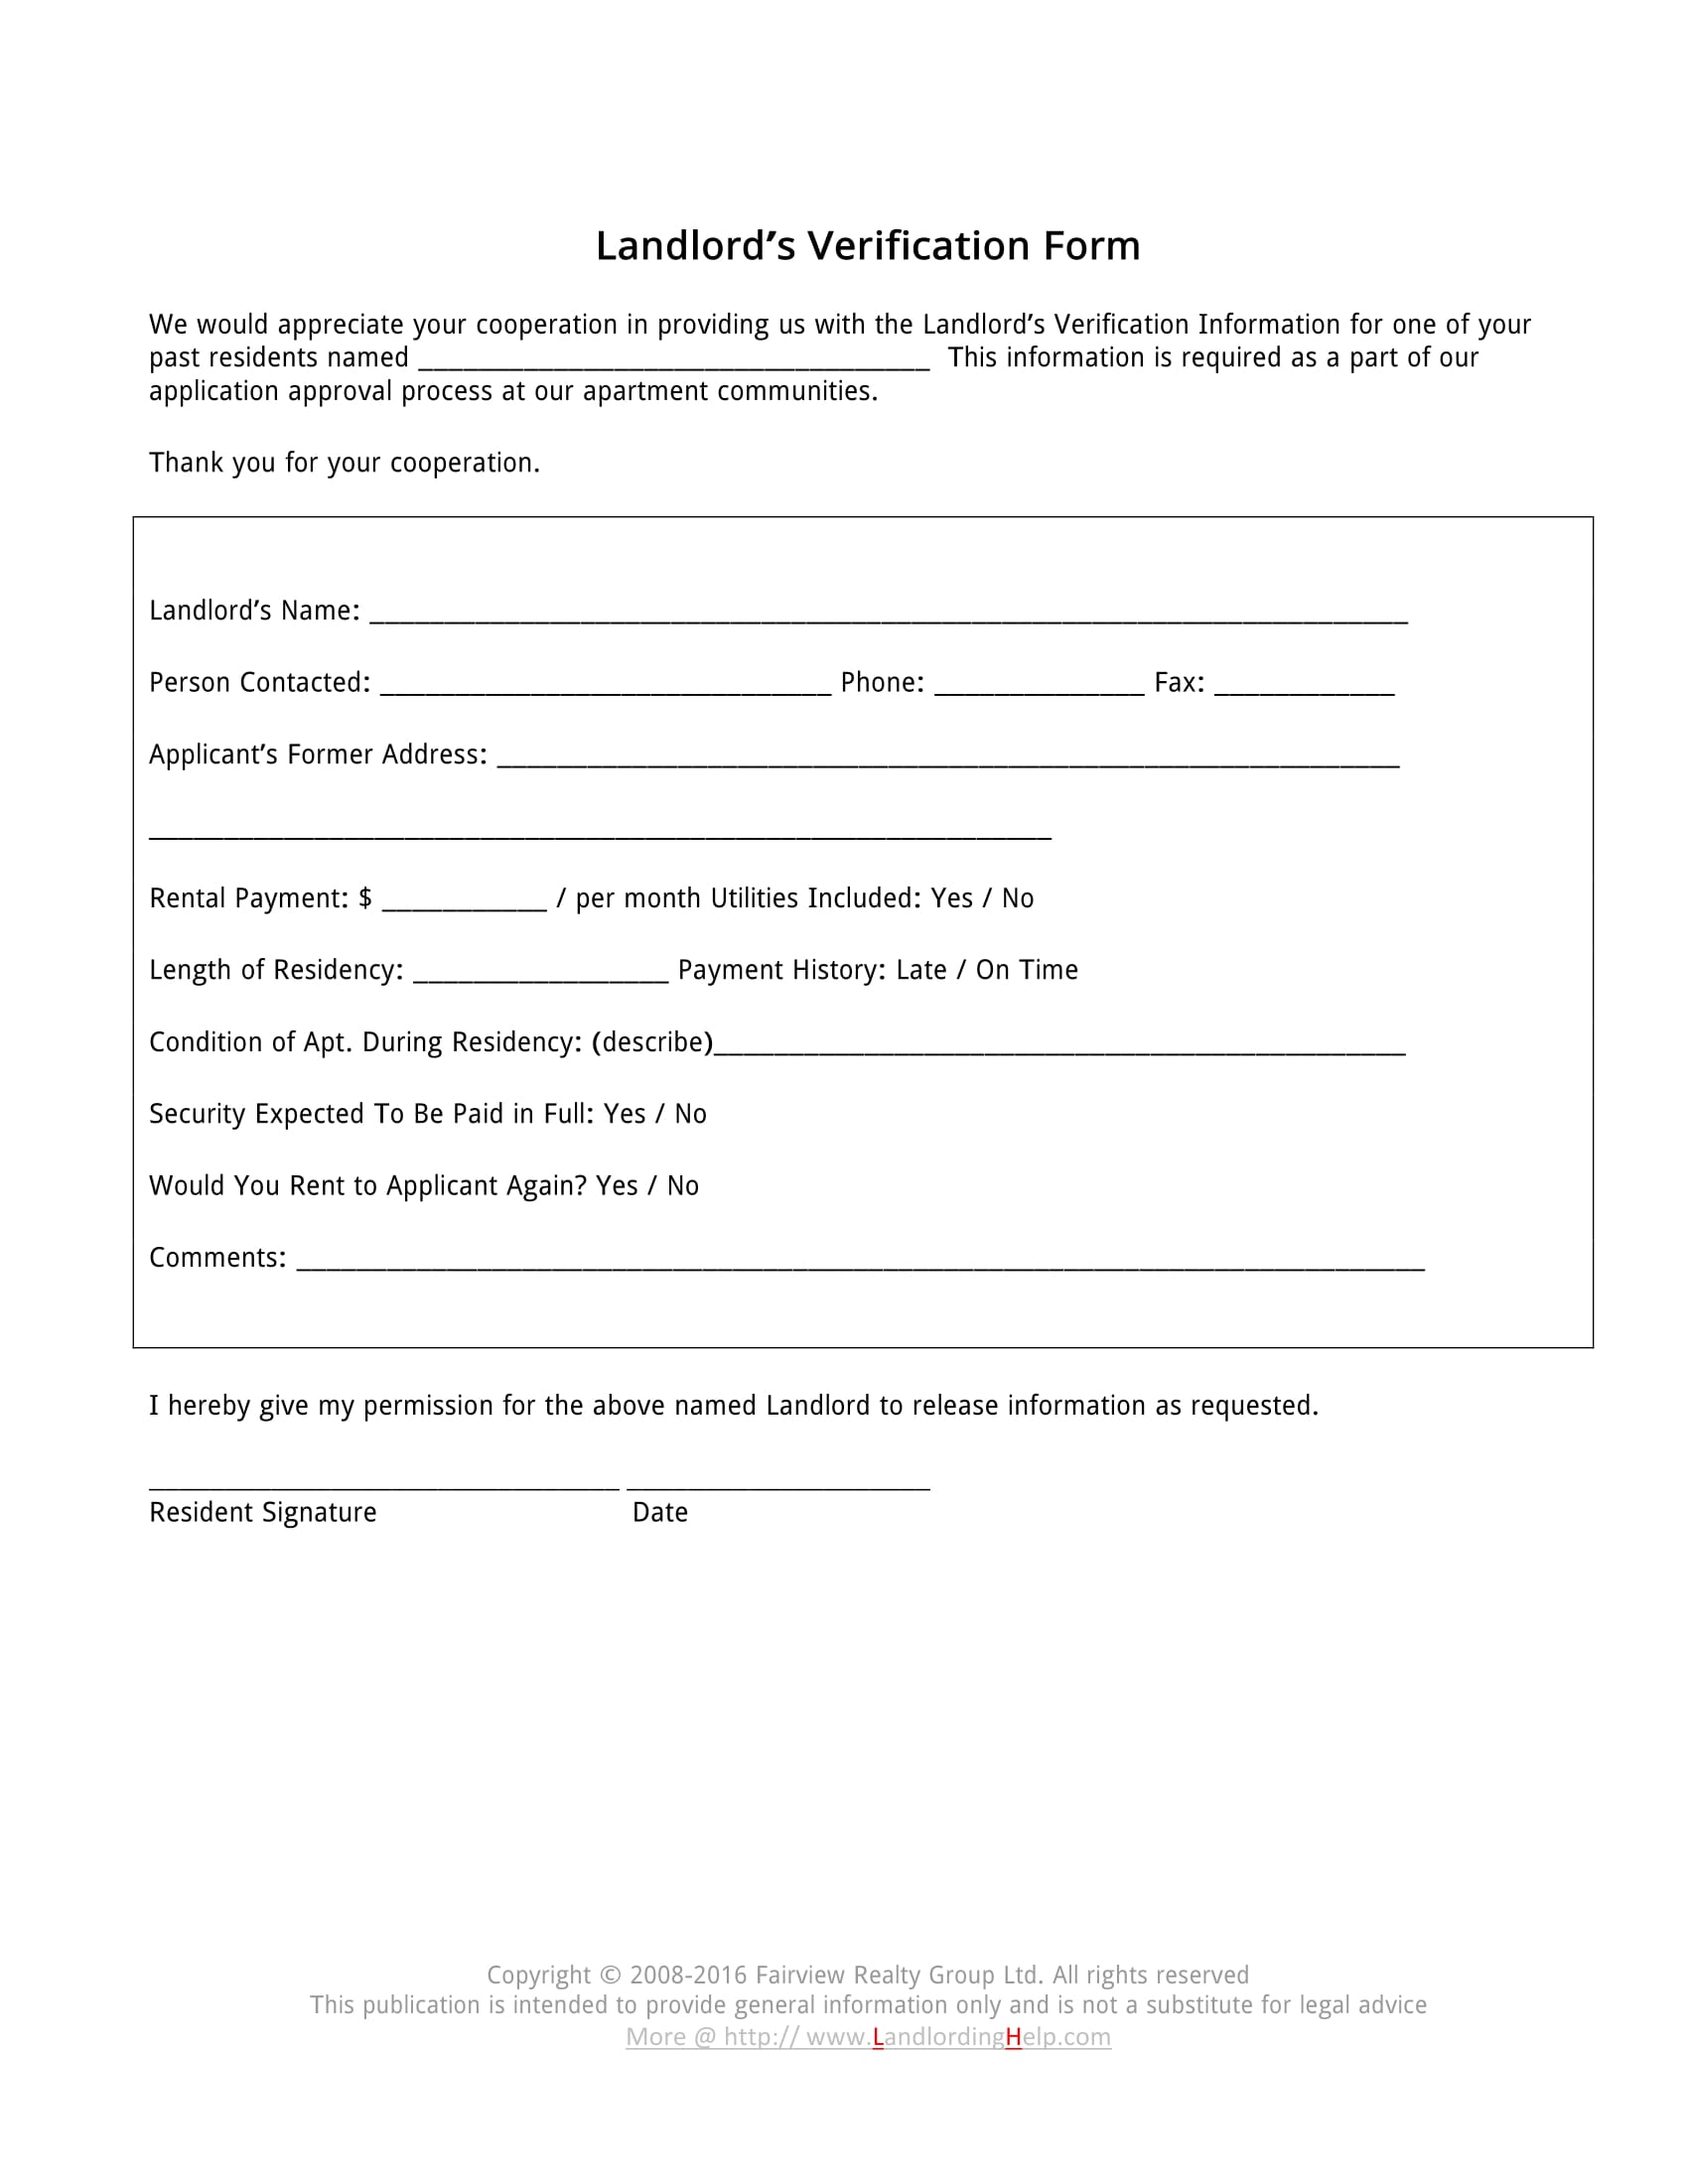 free-15-landlord-forms-agreements-notice-eviction-deposit